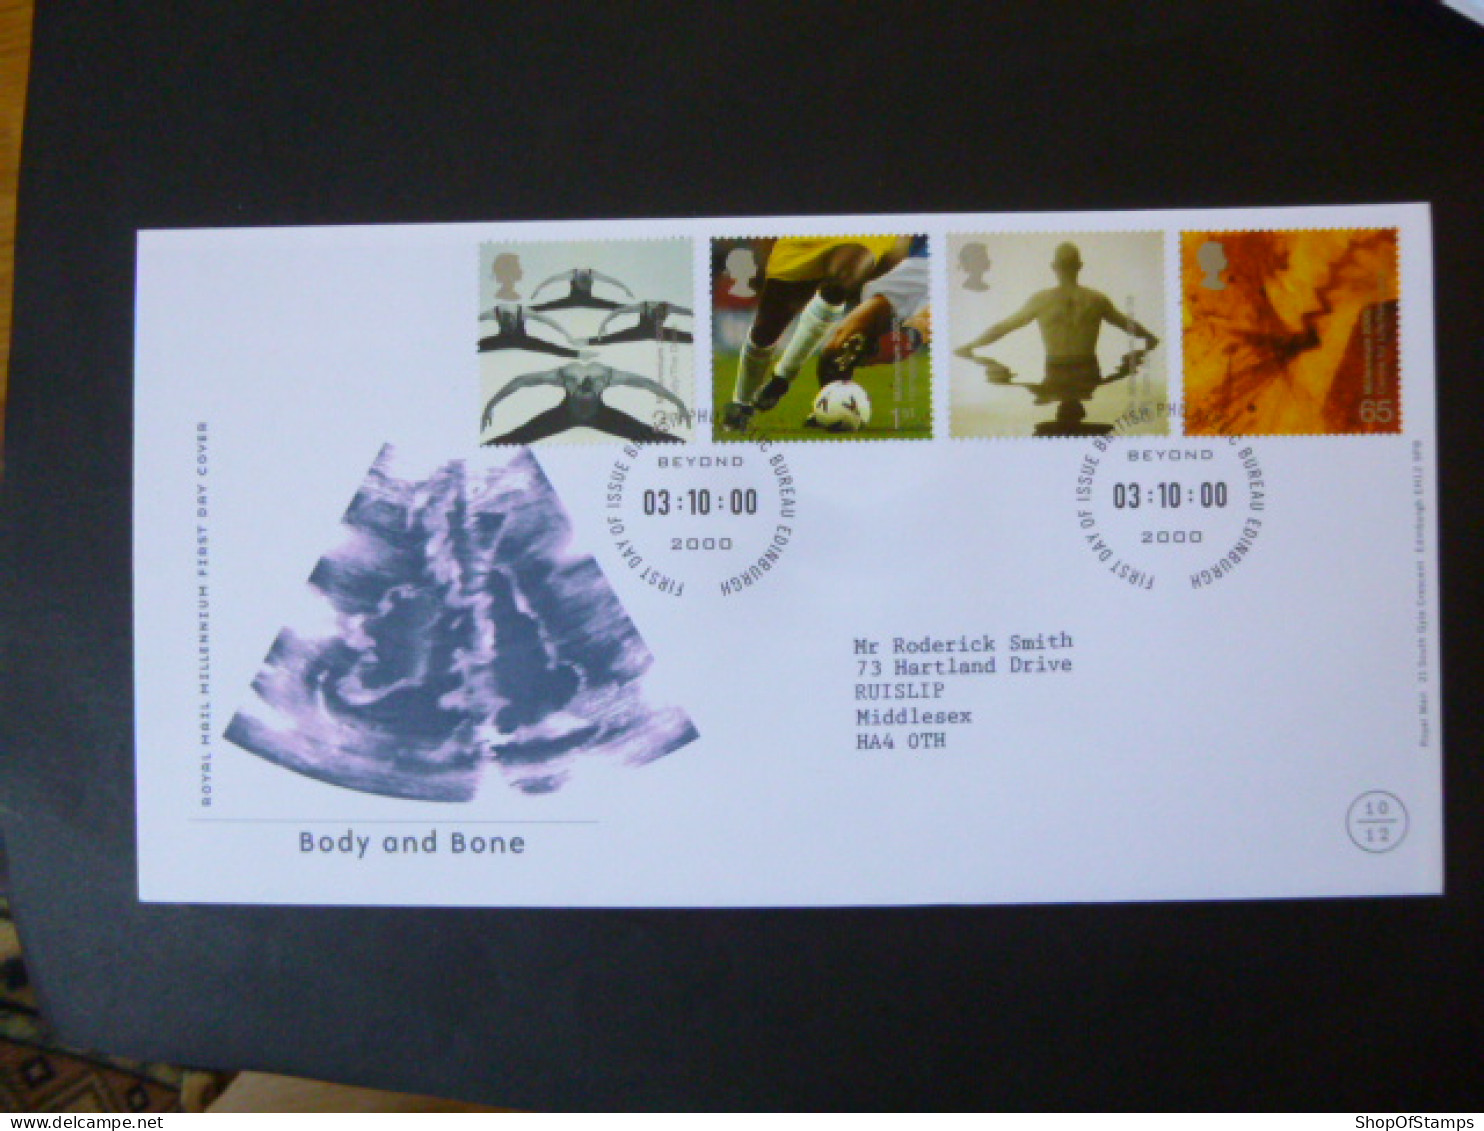 GREAT BRITAIN SG 2166-69 MILLENIUM PROJECTS, BODY AND BONE FDC EDINBURGH - Unclassified